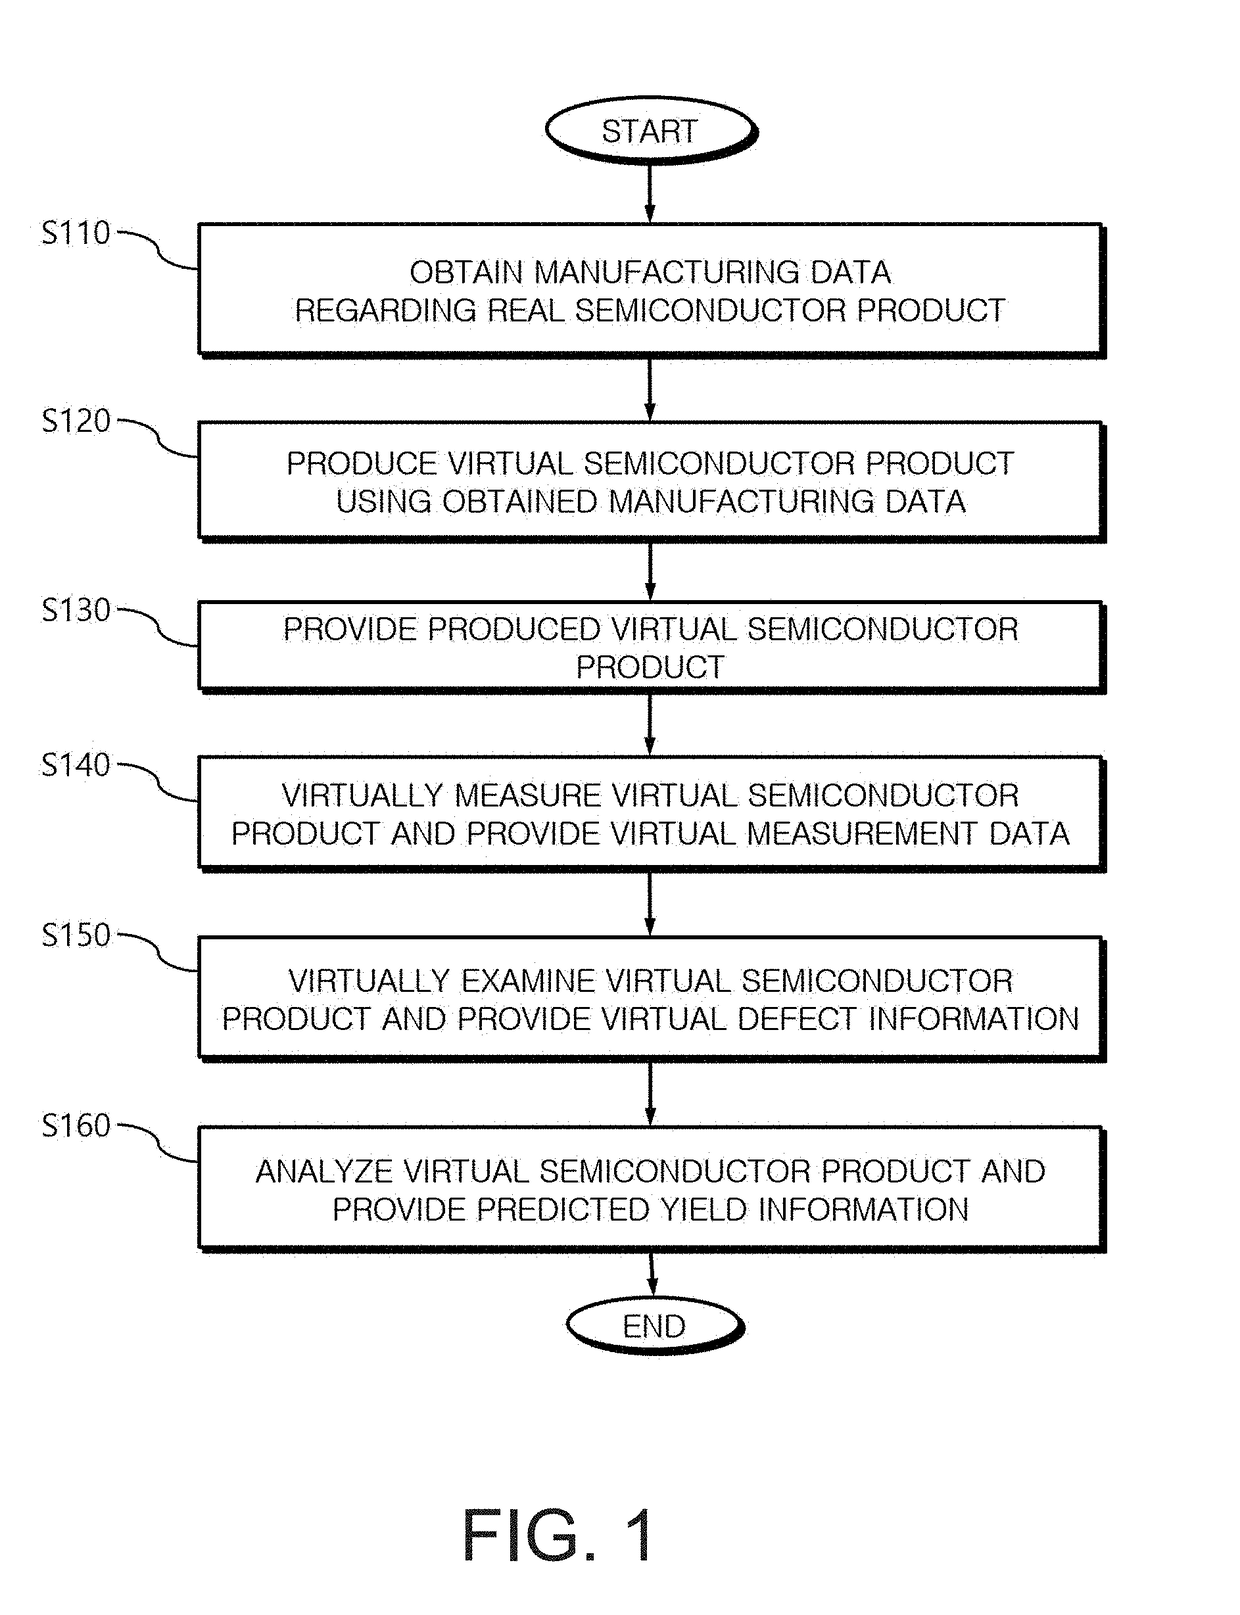 Method and system for providing virtual semiconductor product replicating real semiconductor product